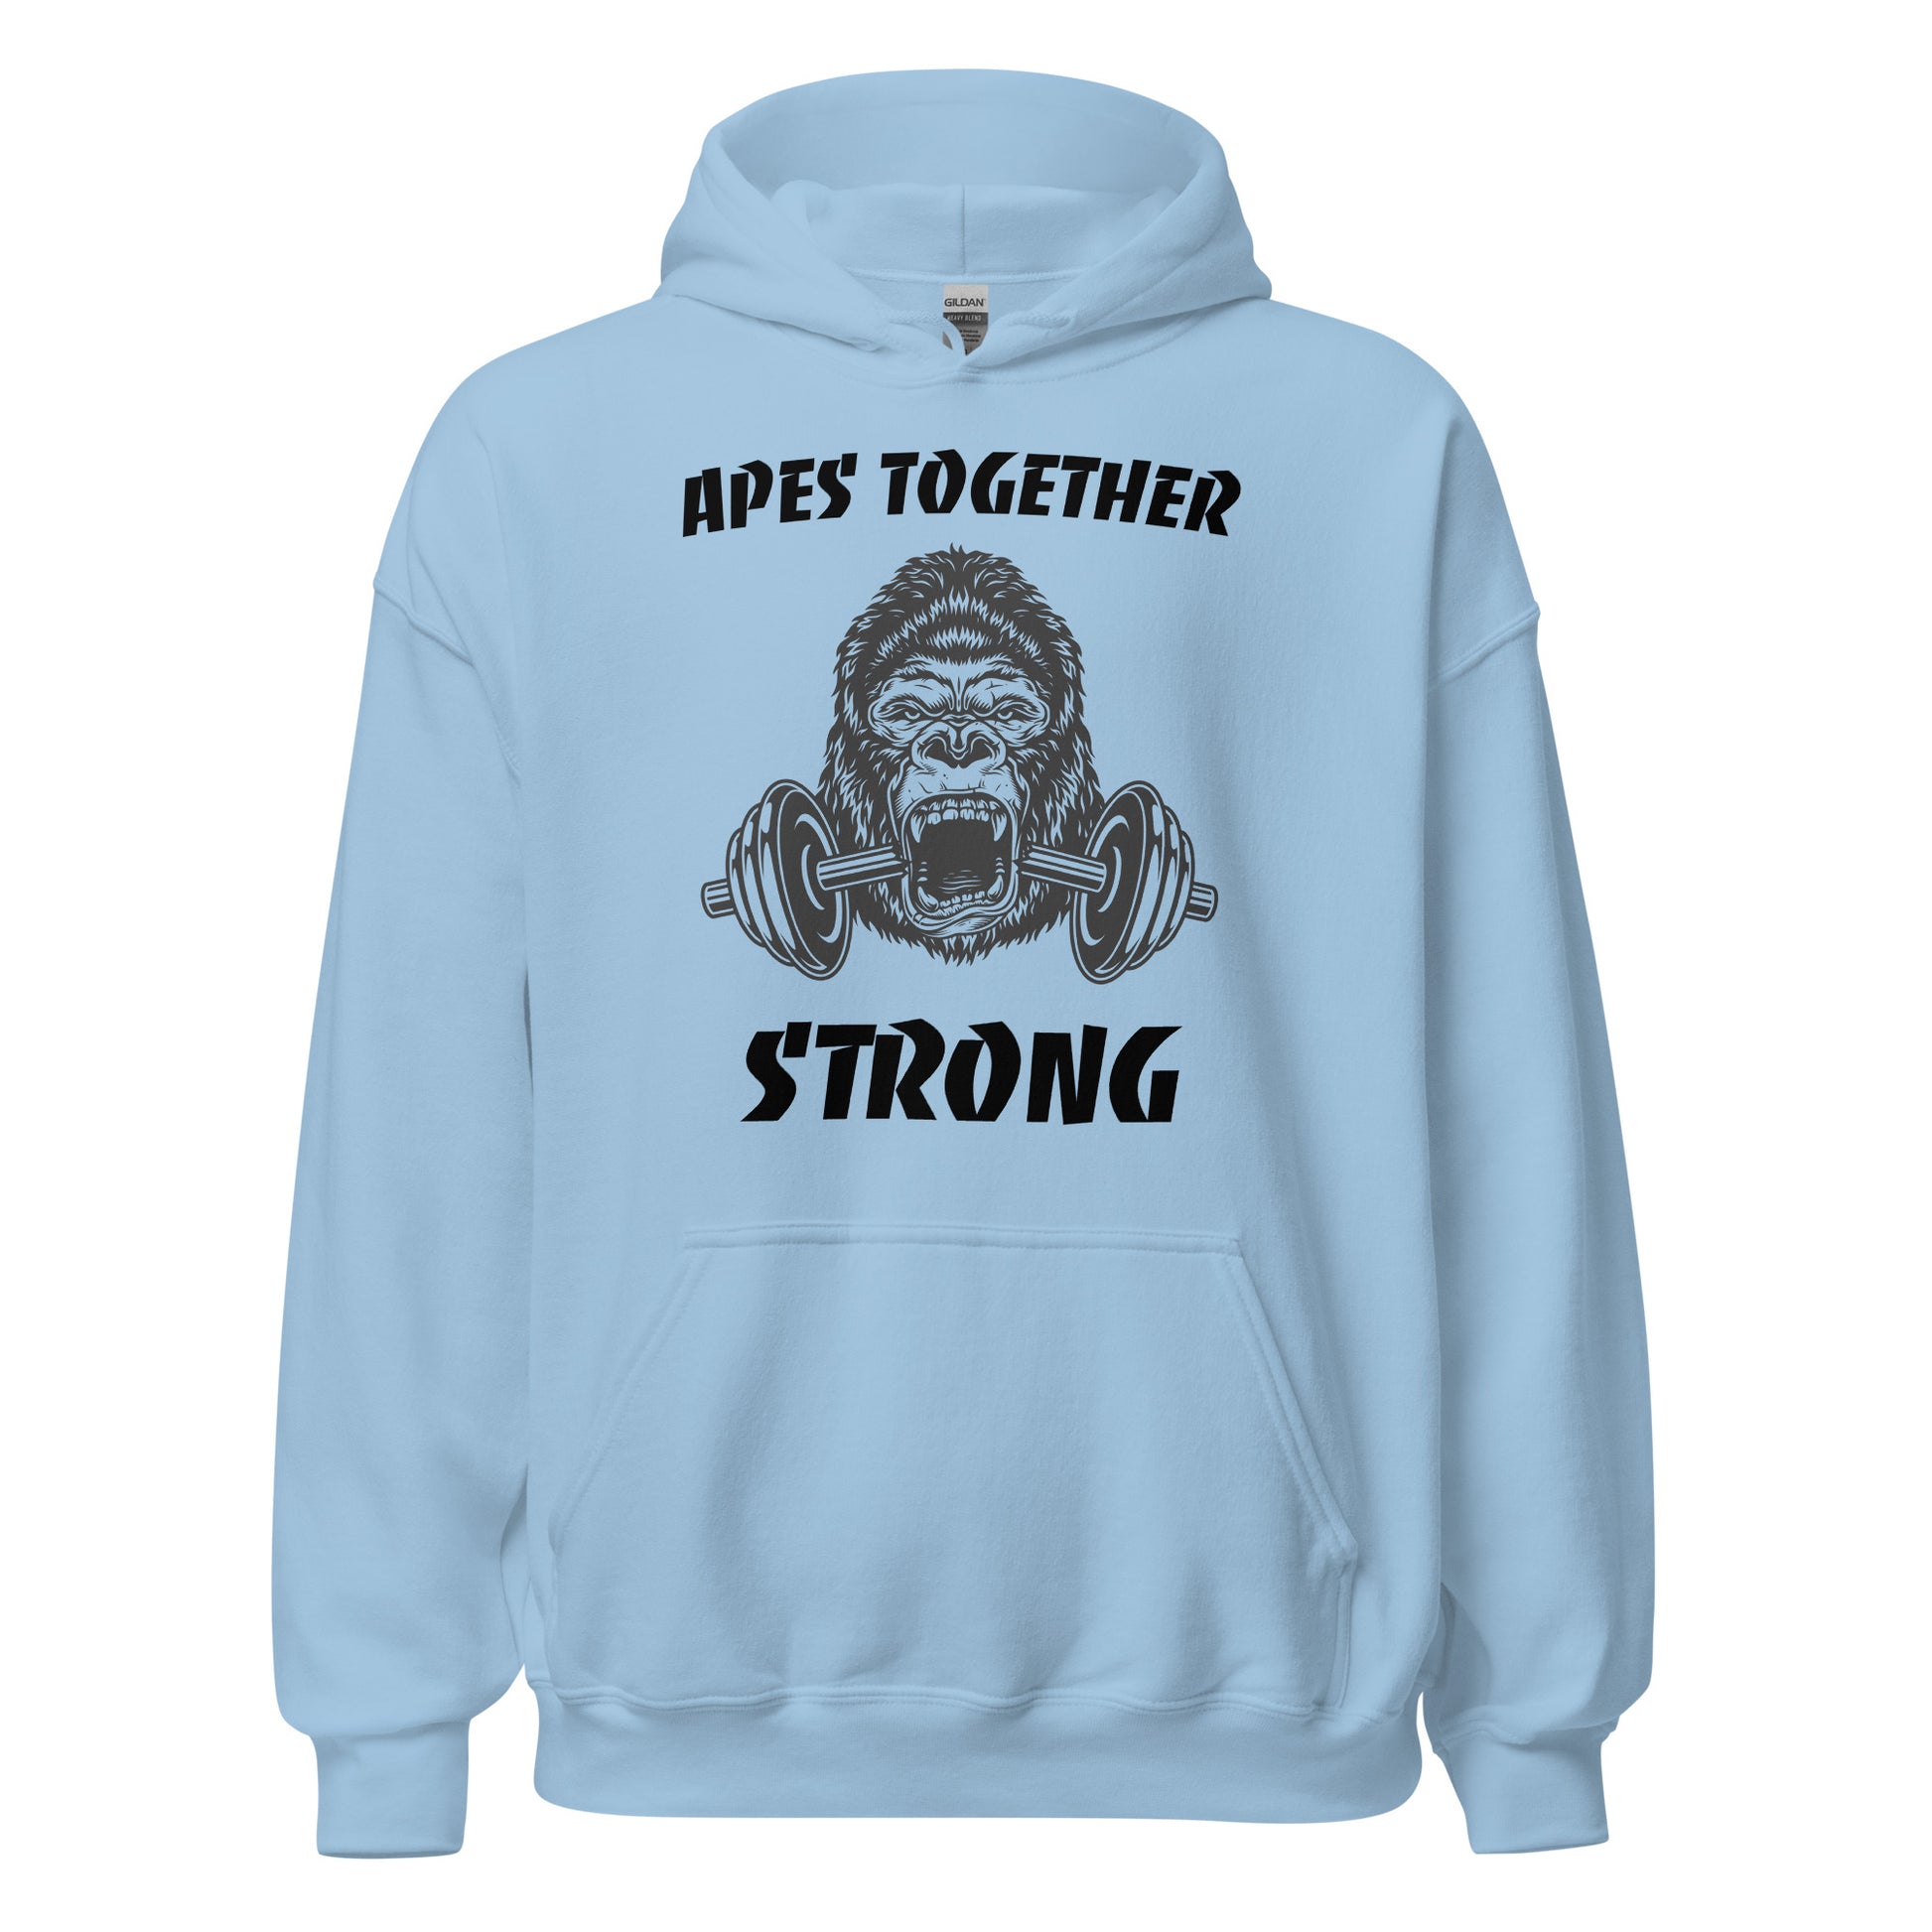 Apes Together Strong Hoodie in Light Blue